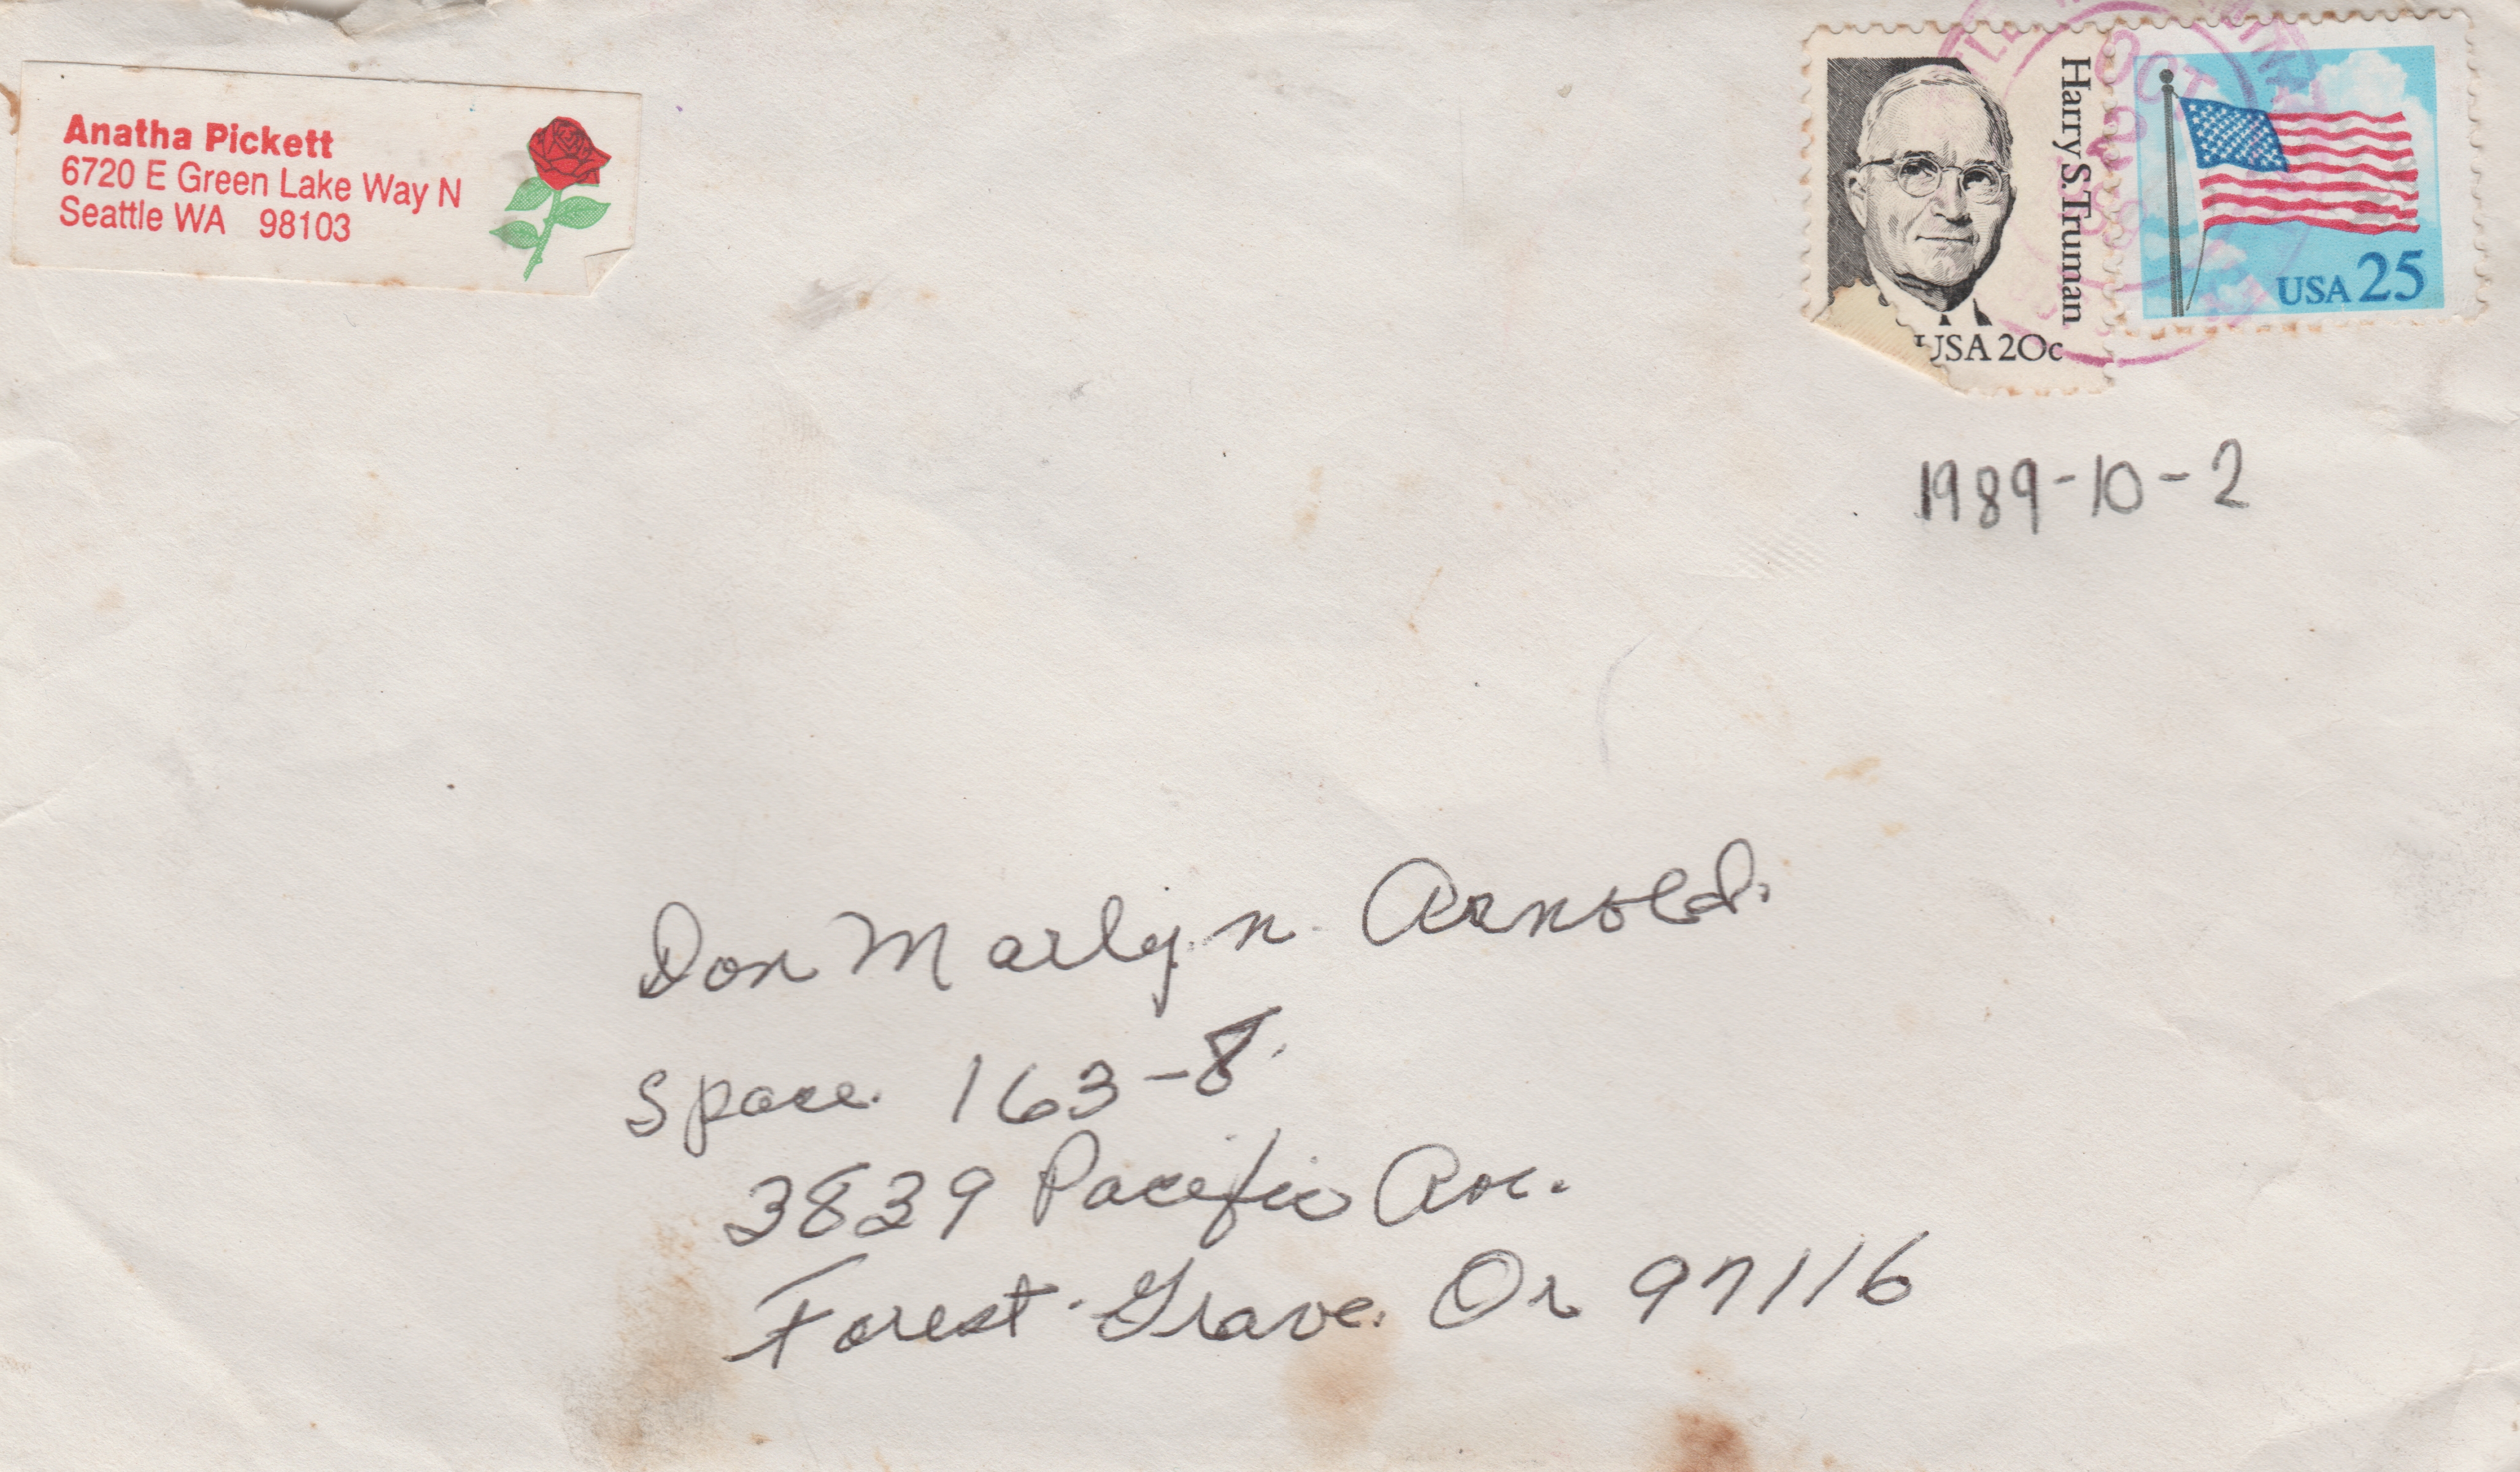 1989-10-02 - ENVELOPE - Anatha Pickett Letter to Marilyn, Don at 163 to share her flowers, garden.jpg